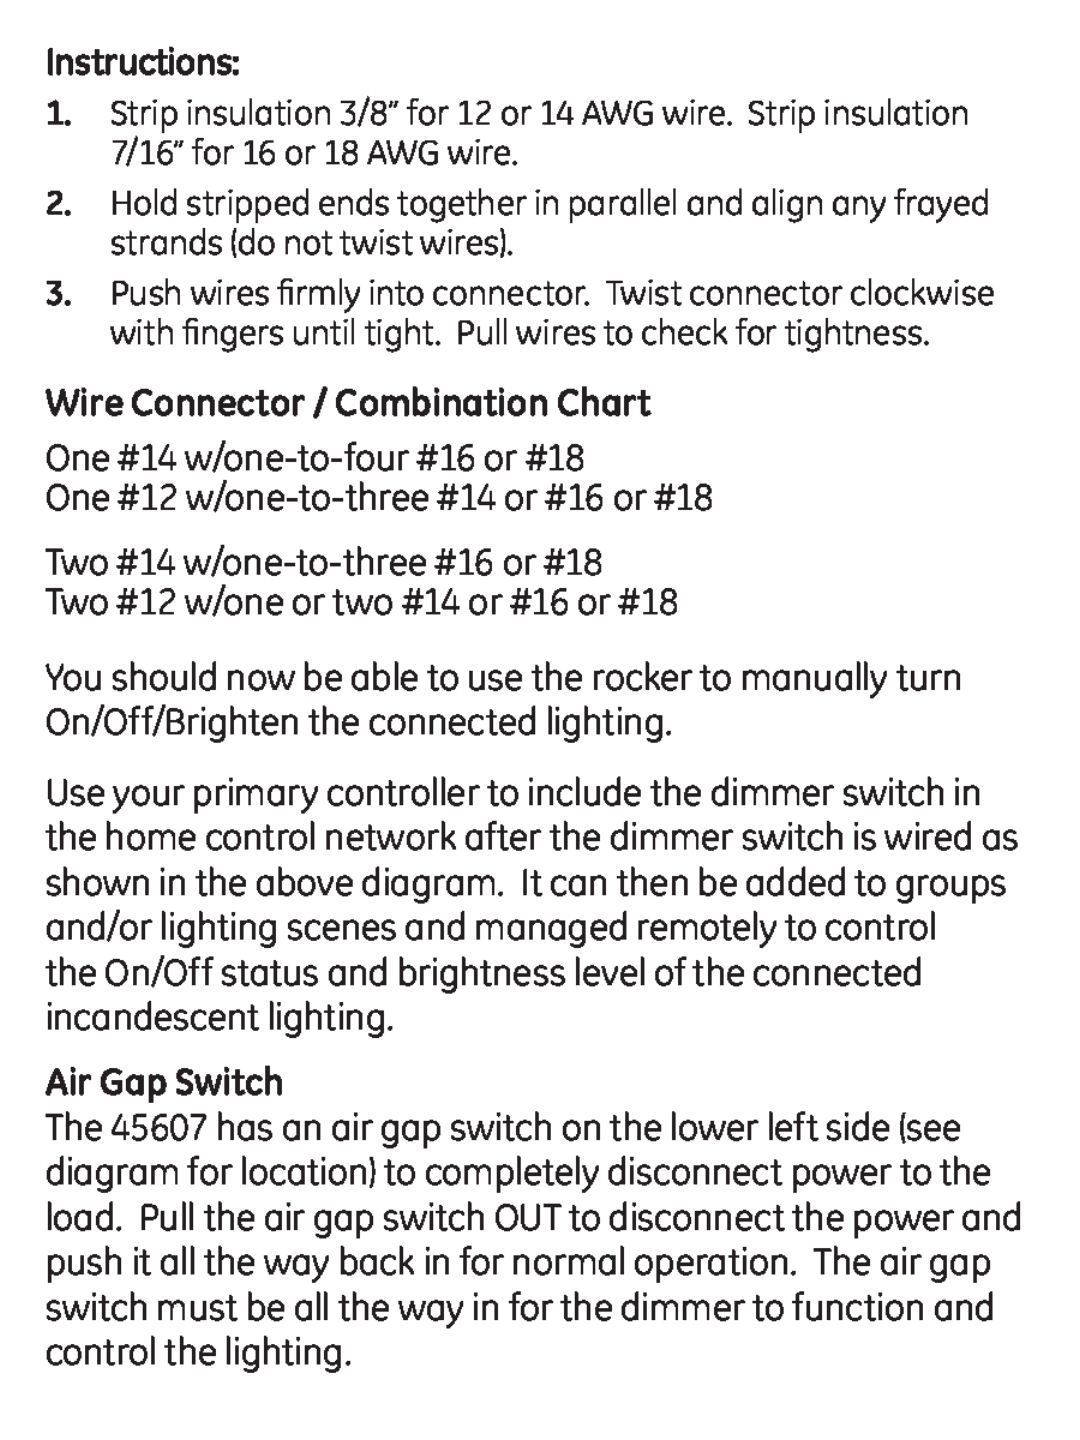 Jasco ZWAVEKIT manual Instructions, Wire Connector / Combination Chart, One #14 w/one-to-four#16 or #18, Air Gap Switch 